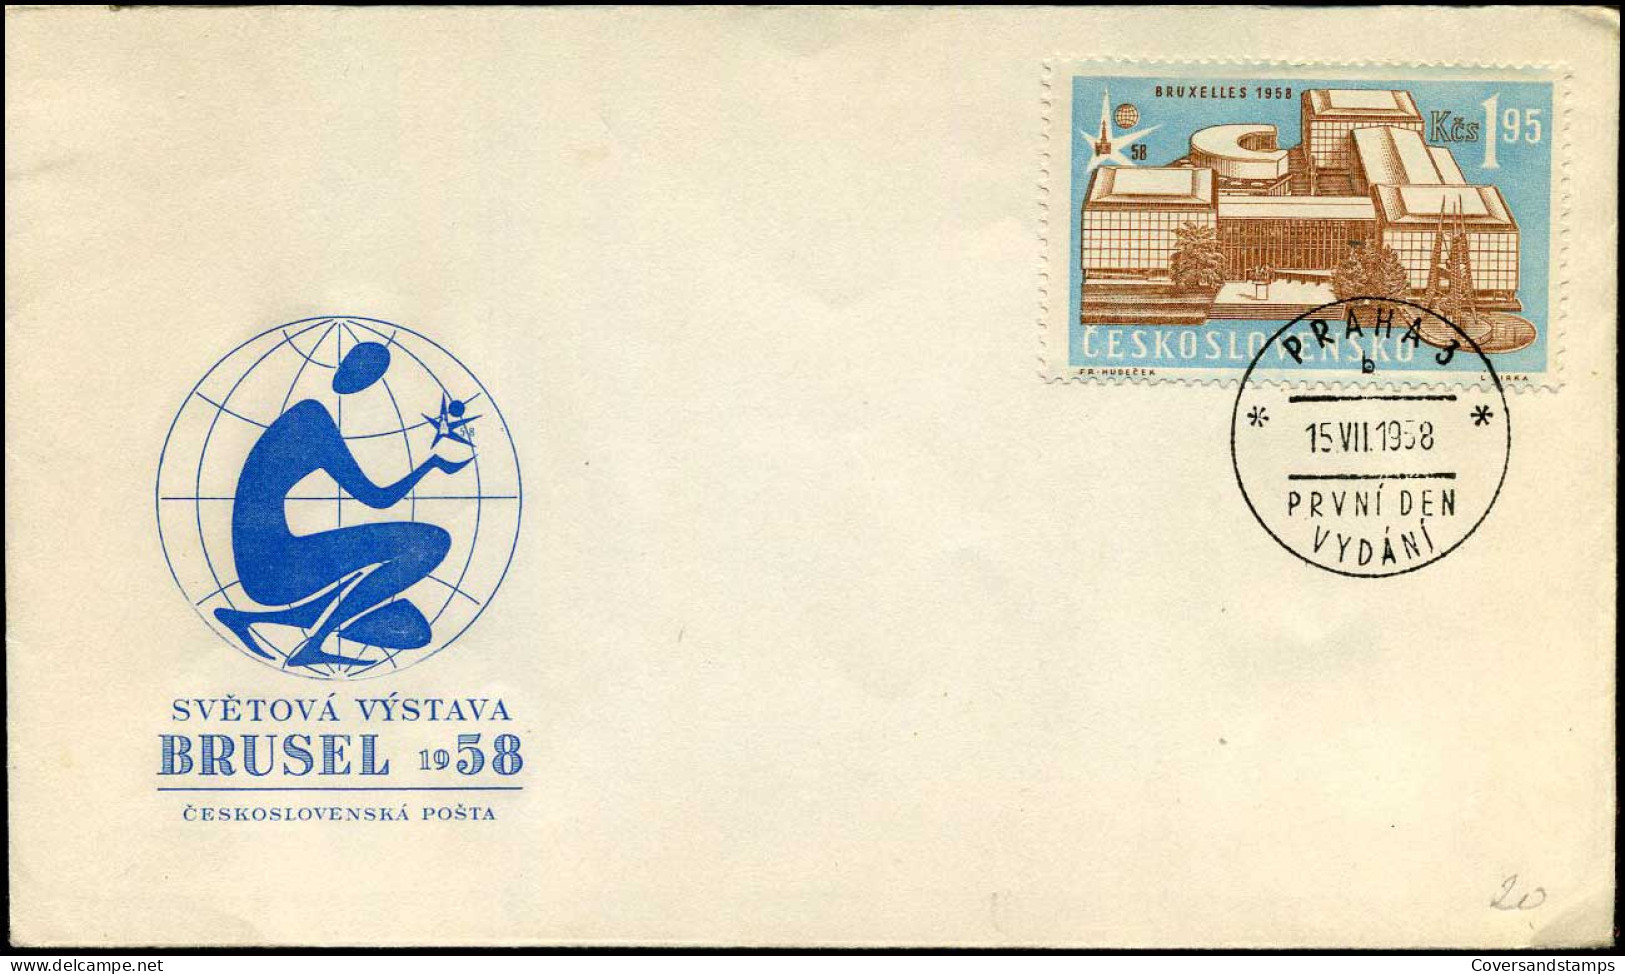 FDC - Expo 58 Brussels - FDC